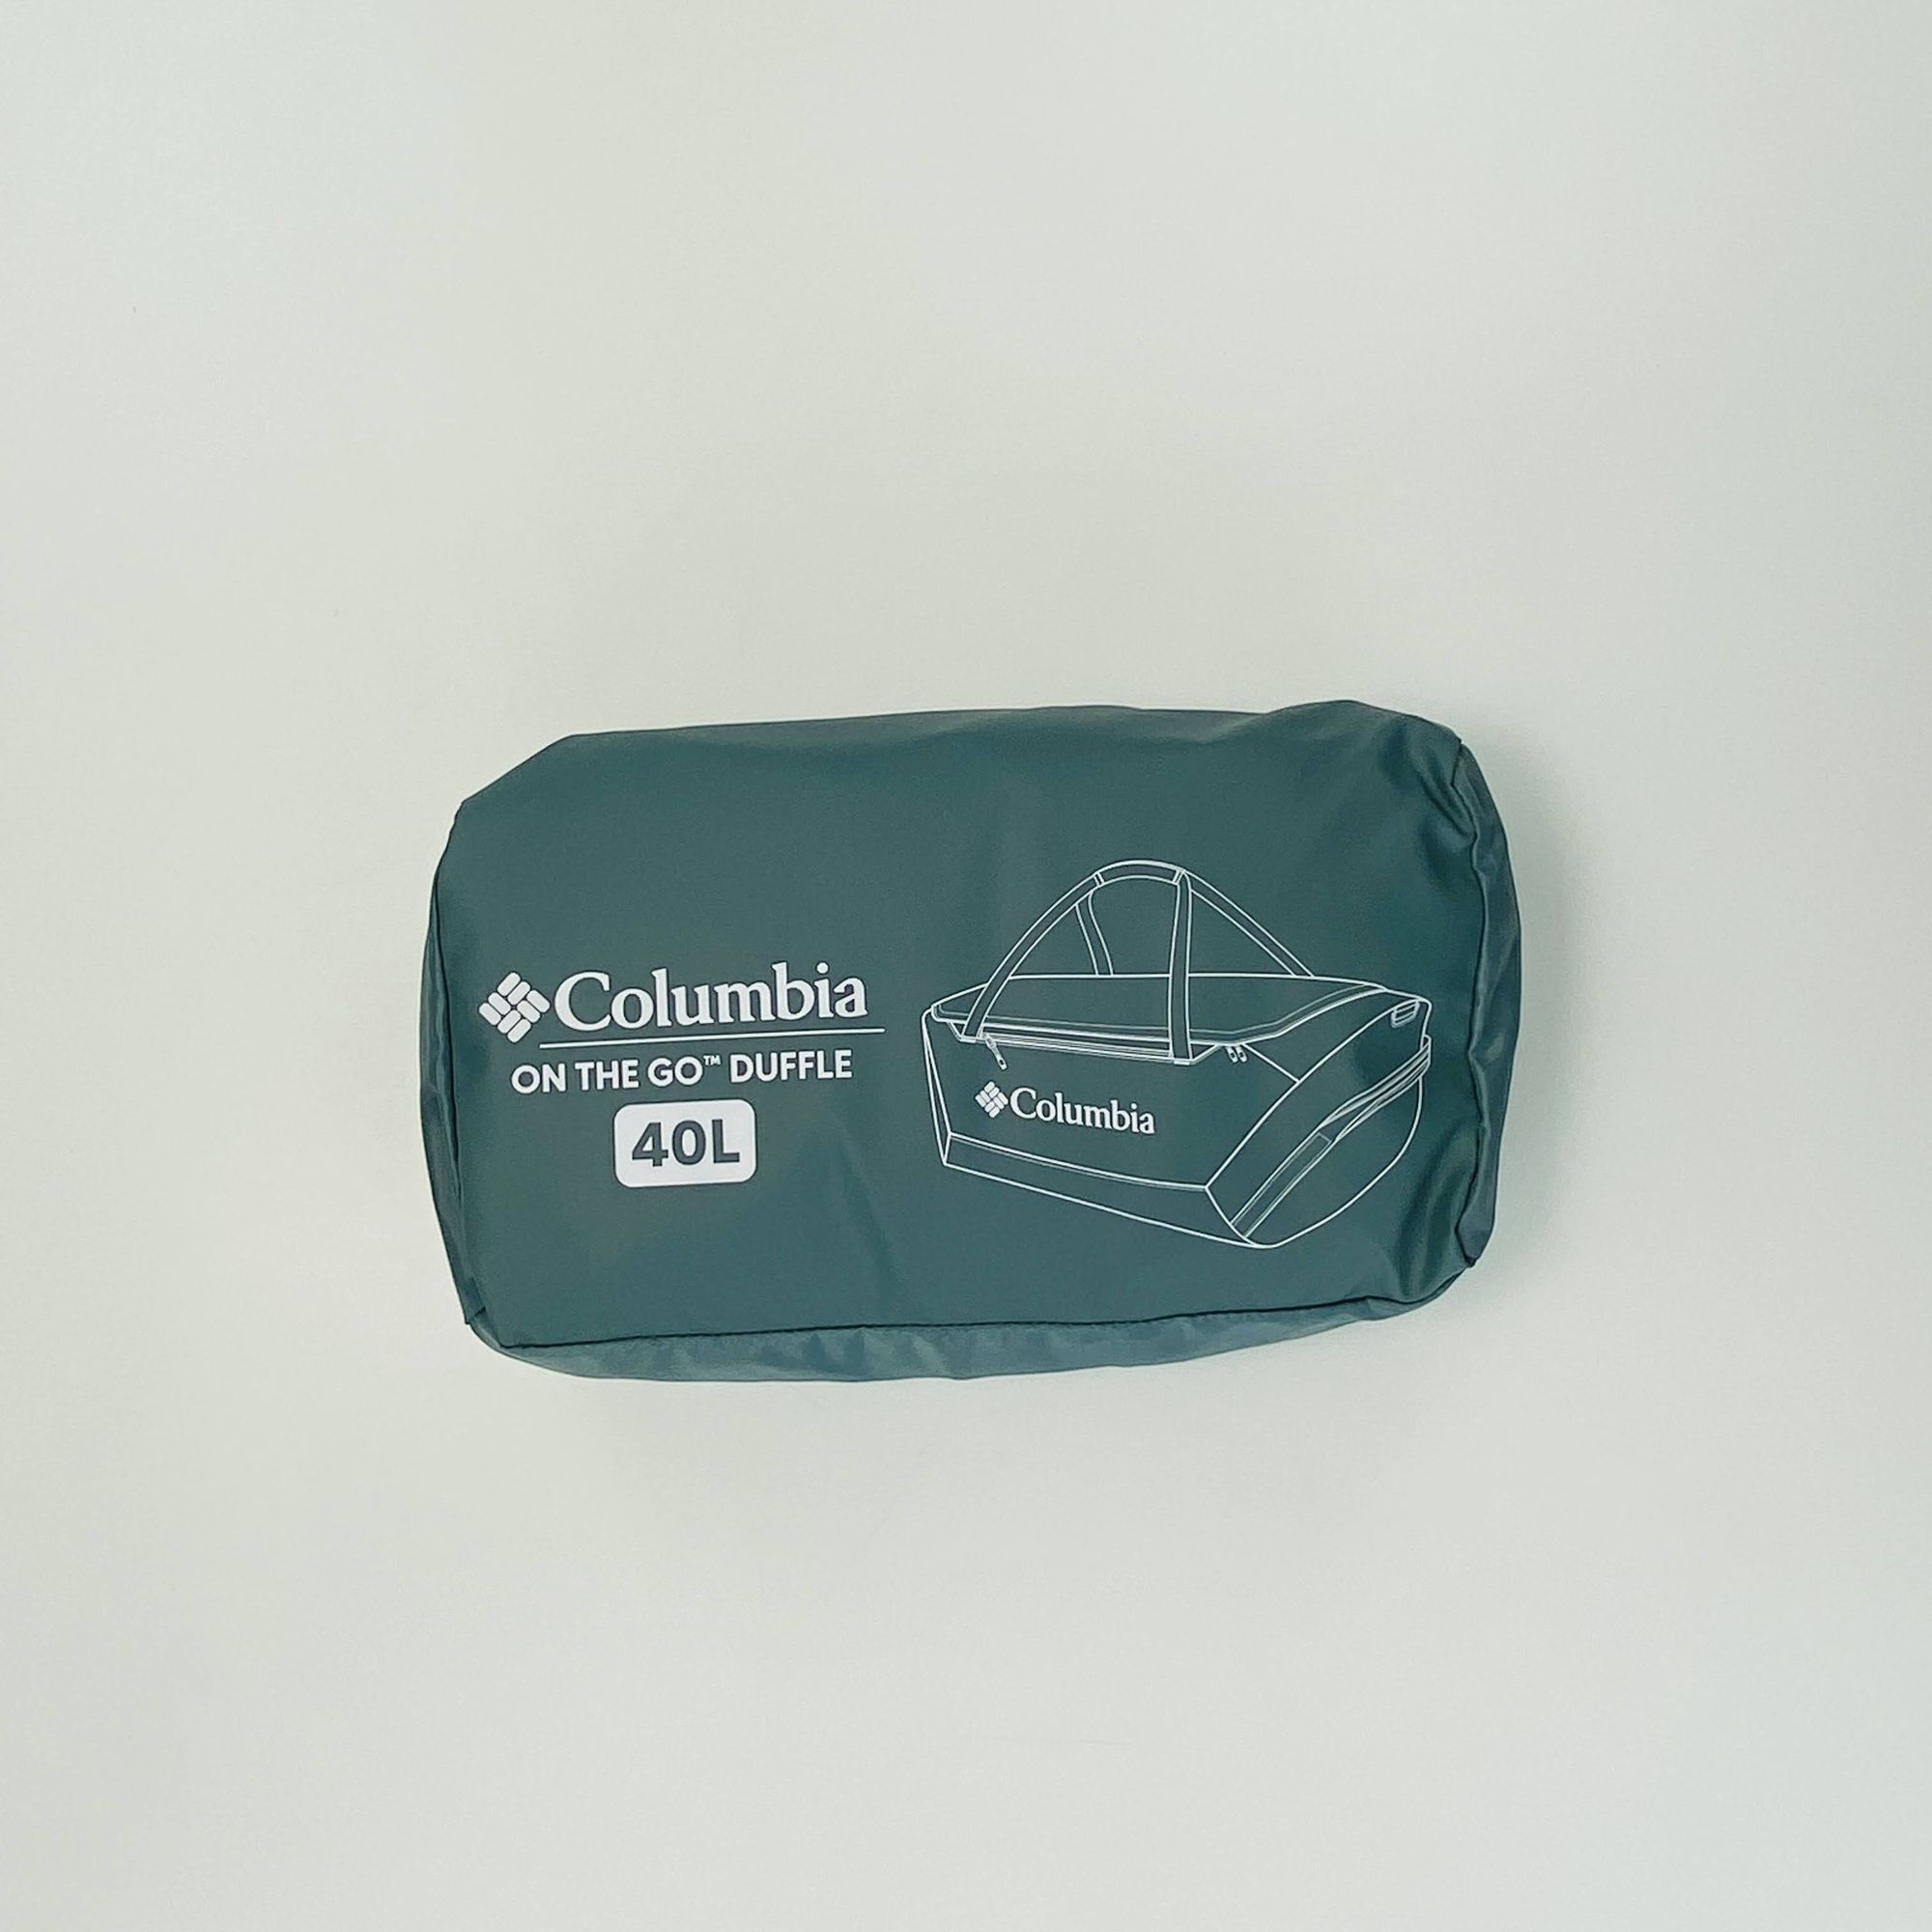 Columbia On The Go™ 40L Duffel - Seconde main Duffel - Gris - Taille unique | Hardloop